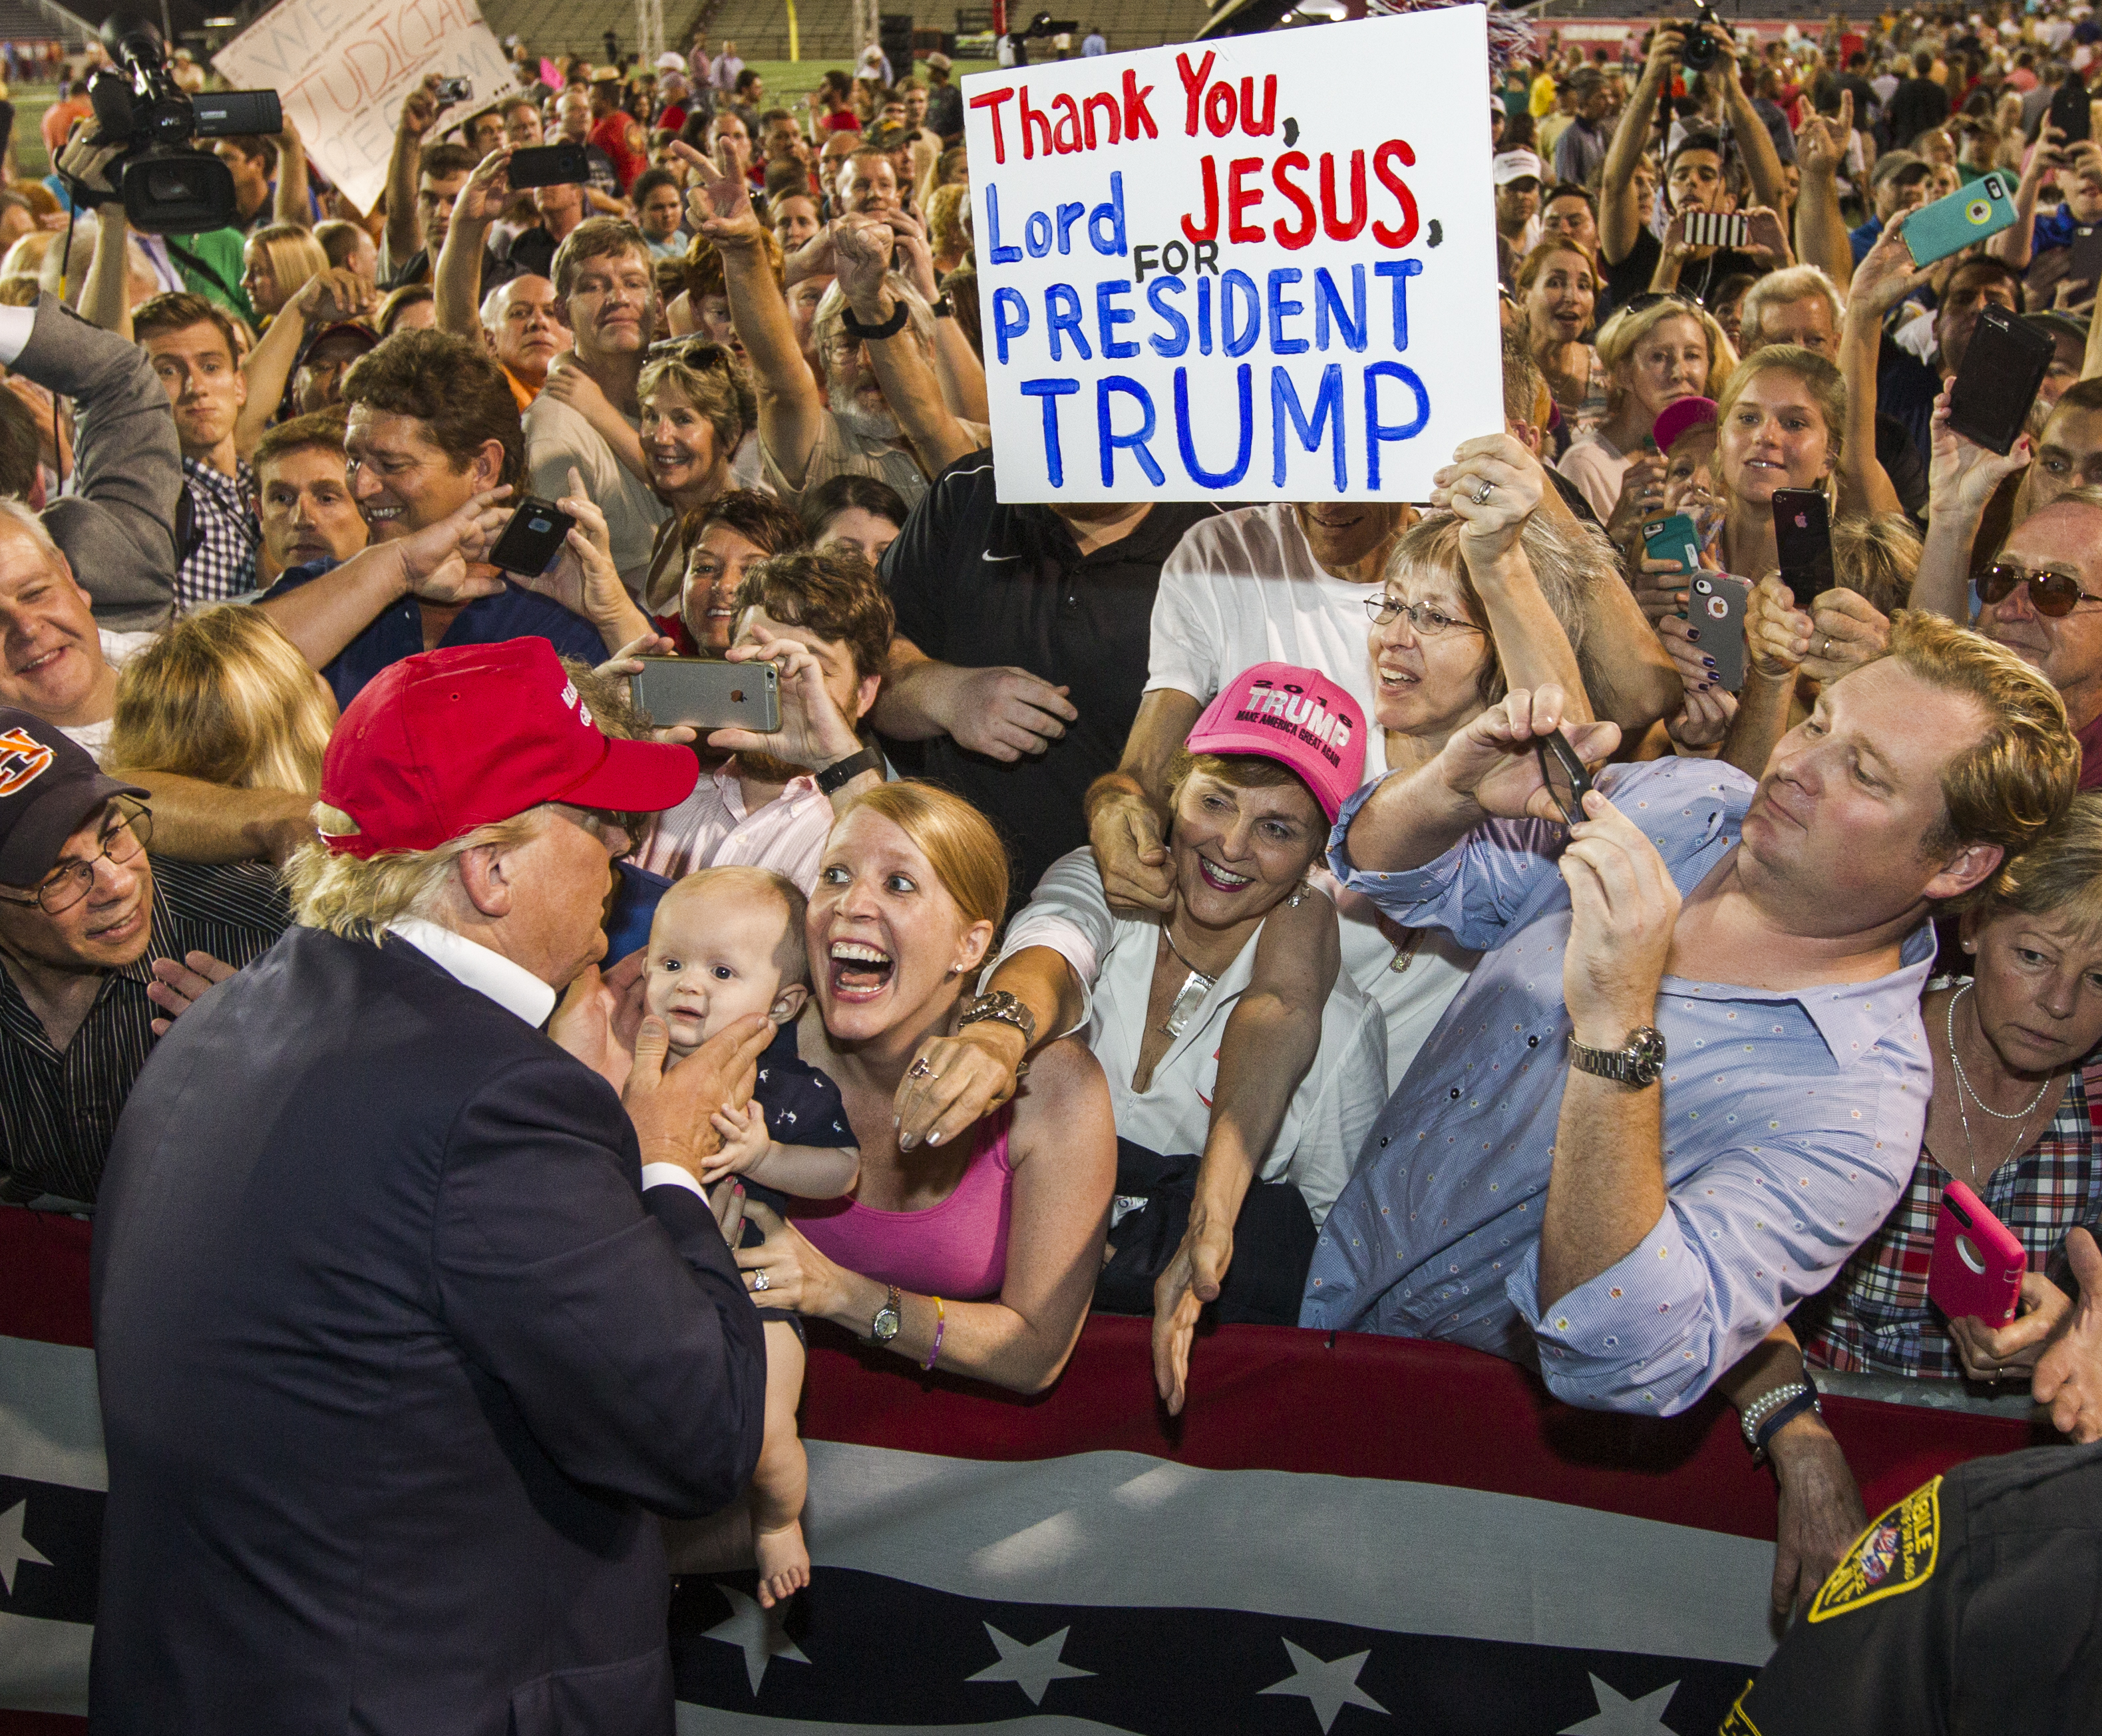 MOBILE, AL- AUGUST 21: Republican presidential candidate Donald Trump greets supporters after his rally at Ladd-Peebles Stadium on August 21, 2015 in Mobile, Alabama. The Trump campaign moved tonight's rally to a larger stadium to accommodate demand. (Photo by Mark Wallheiser/Getty Images)